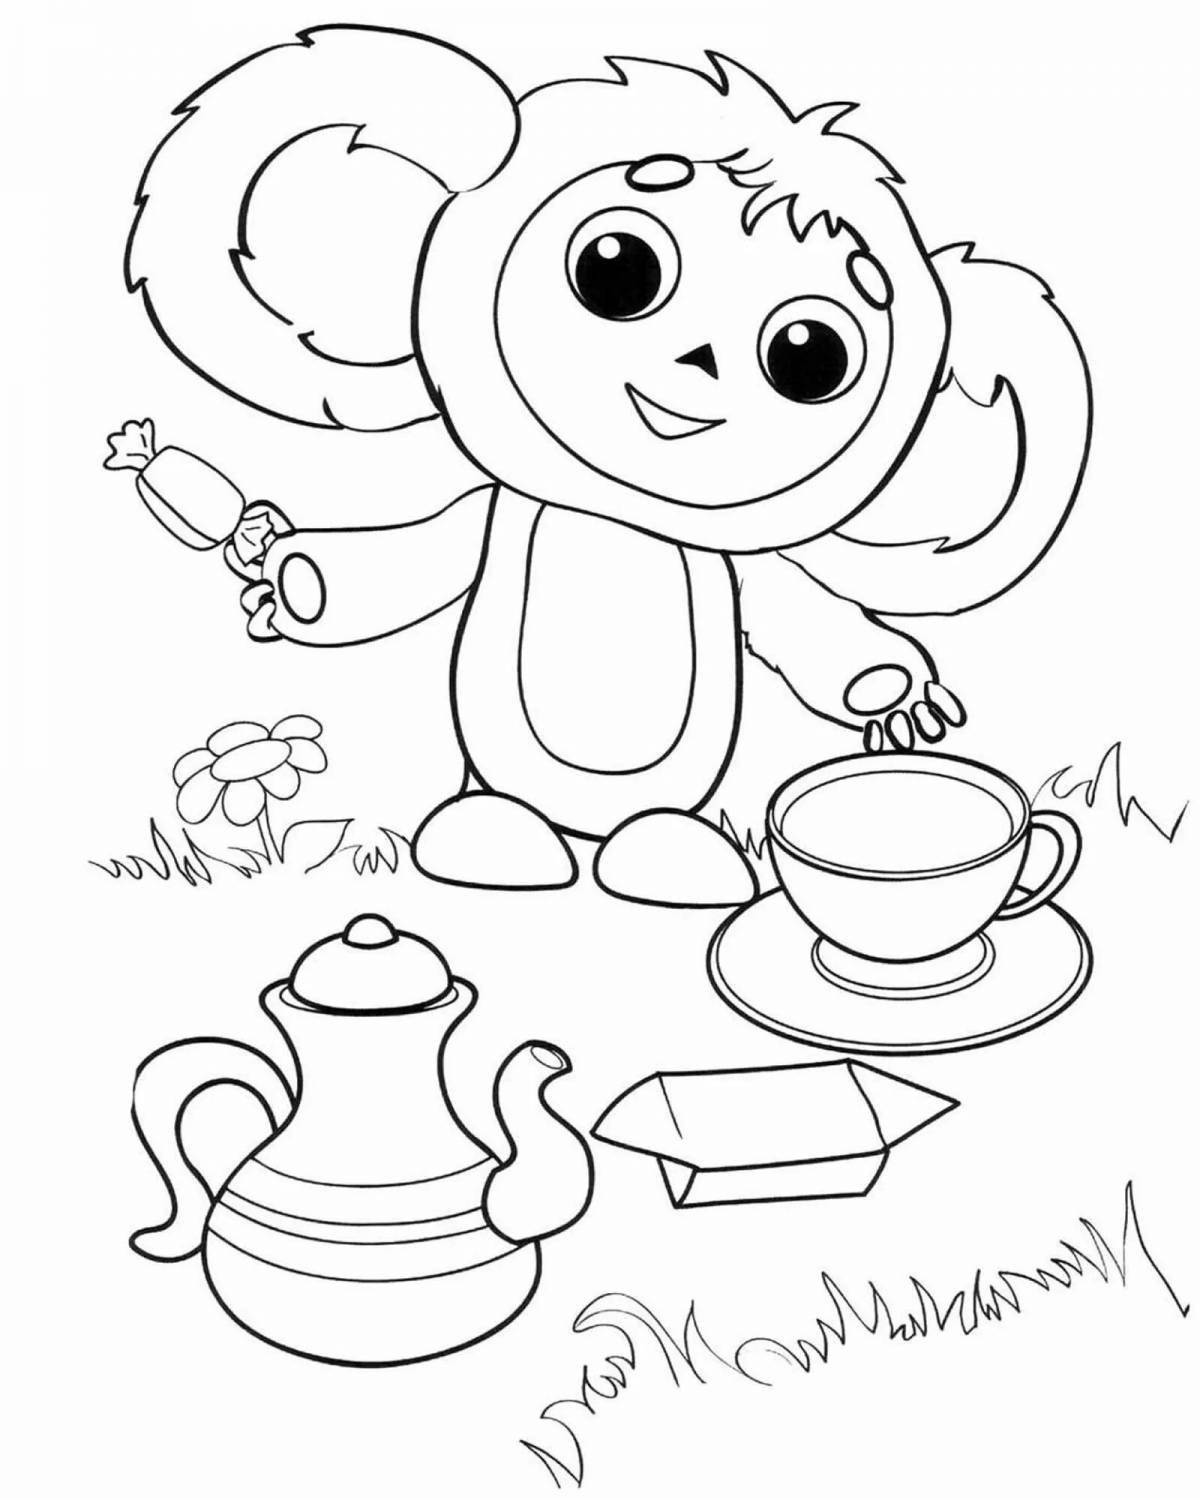 Coloring page charming cheburashka for children 6-7 years old